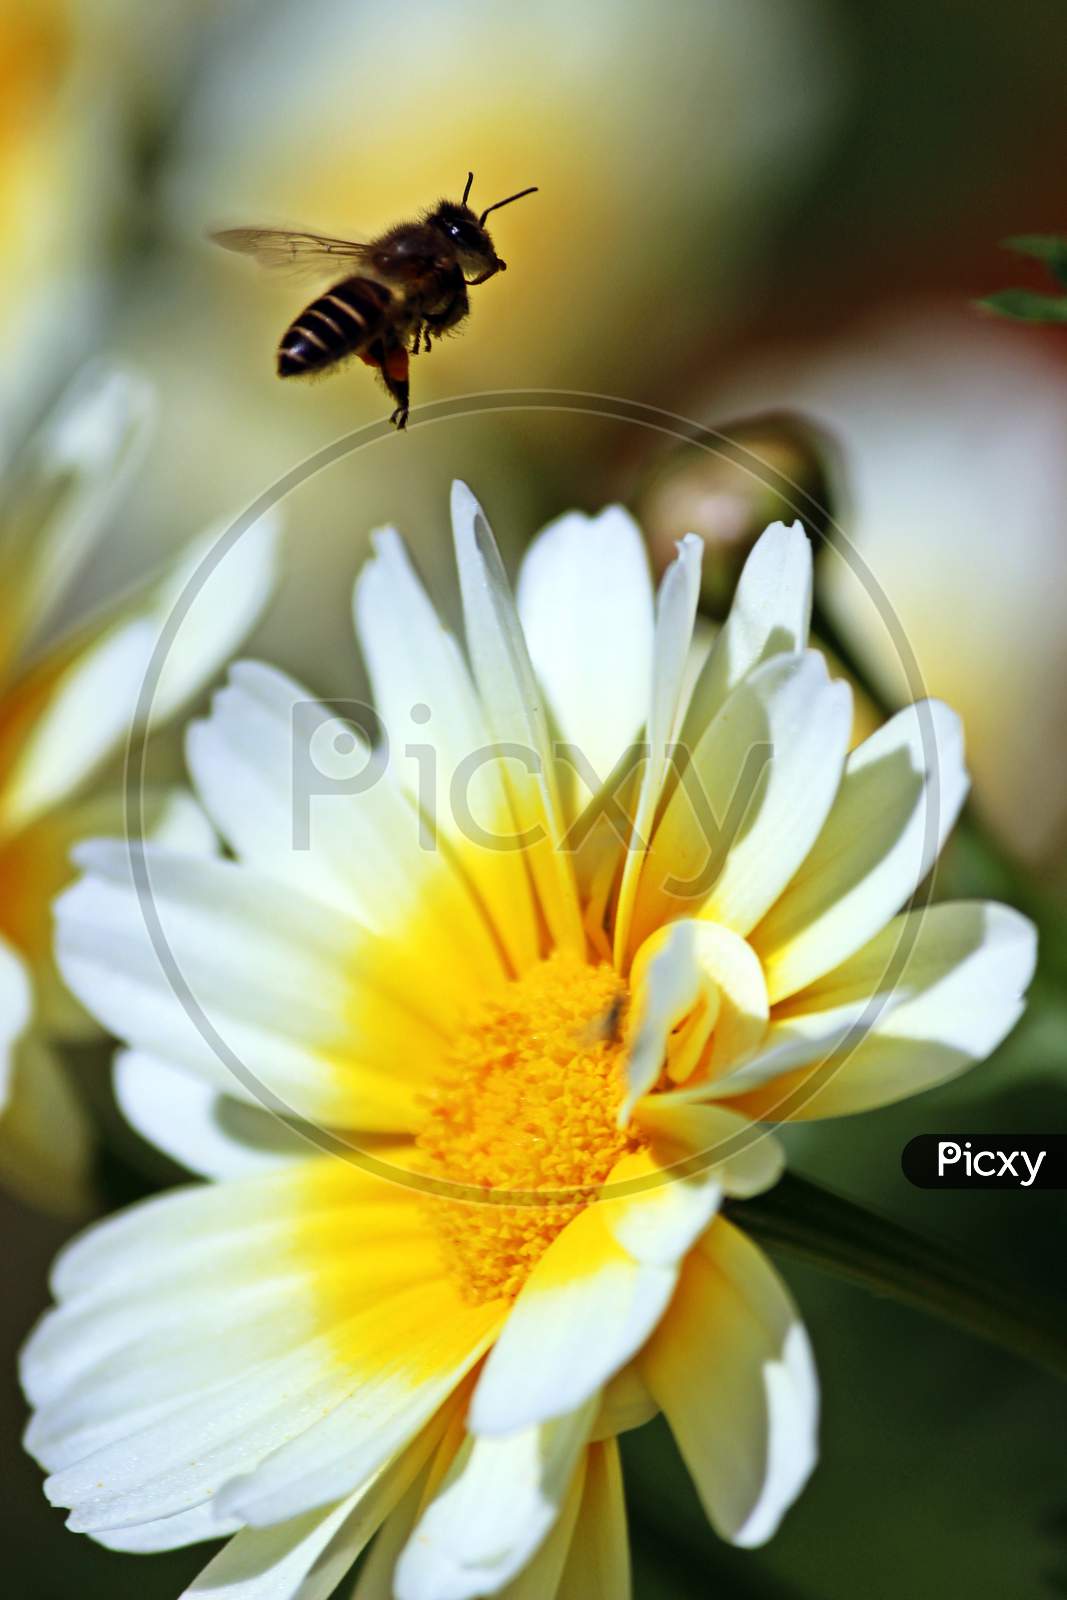 Insect on the flower